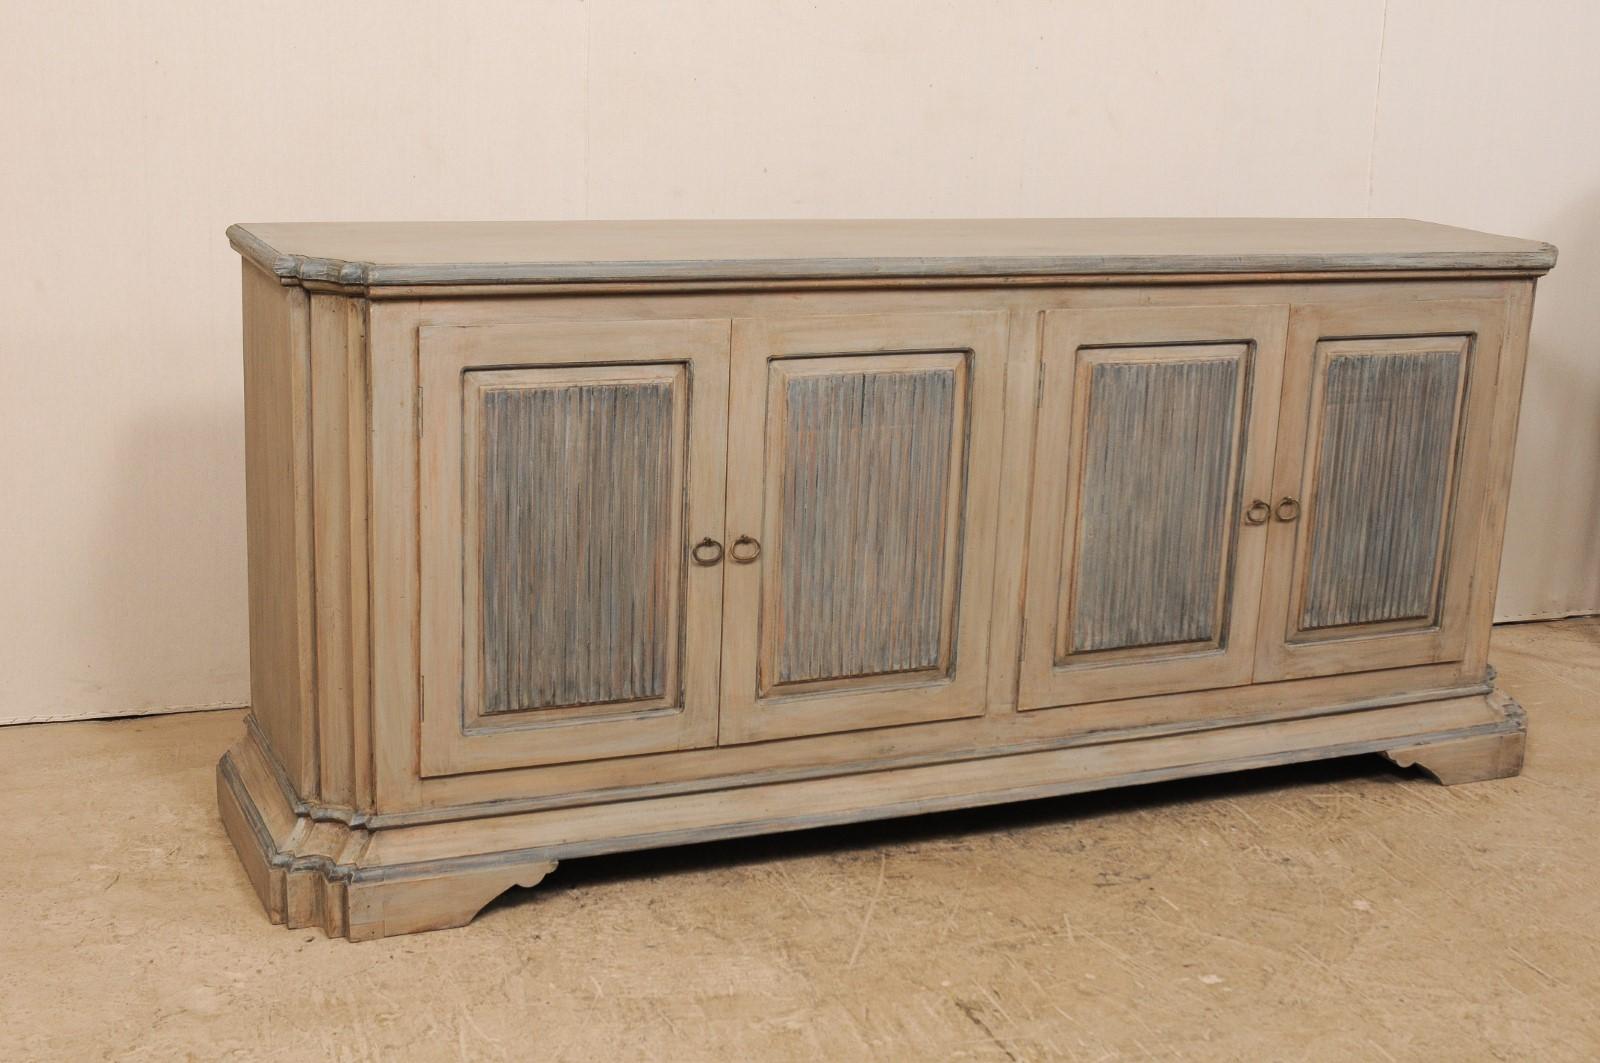 Carved Vintage Italian Style Painted Wood Buffet Cabinet with Reeded Doors